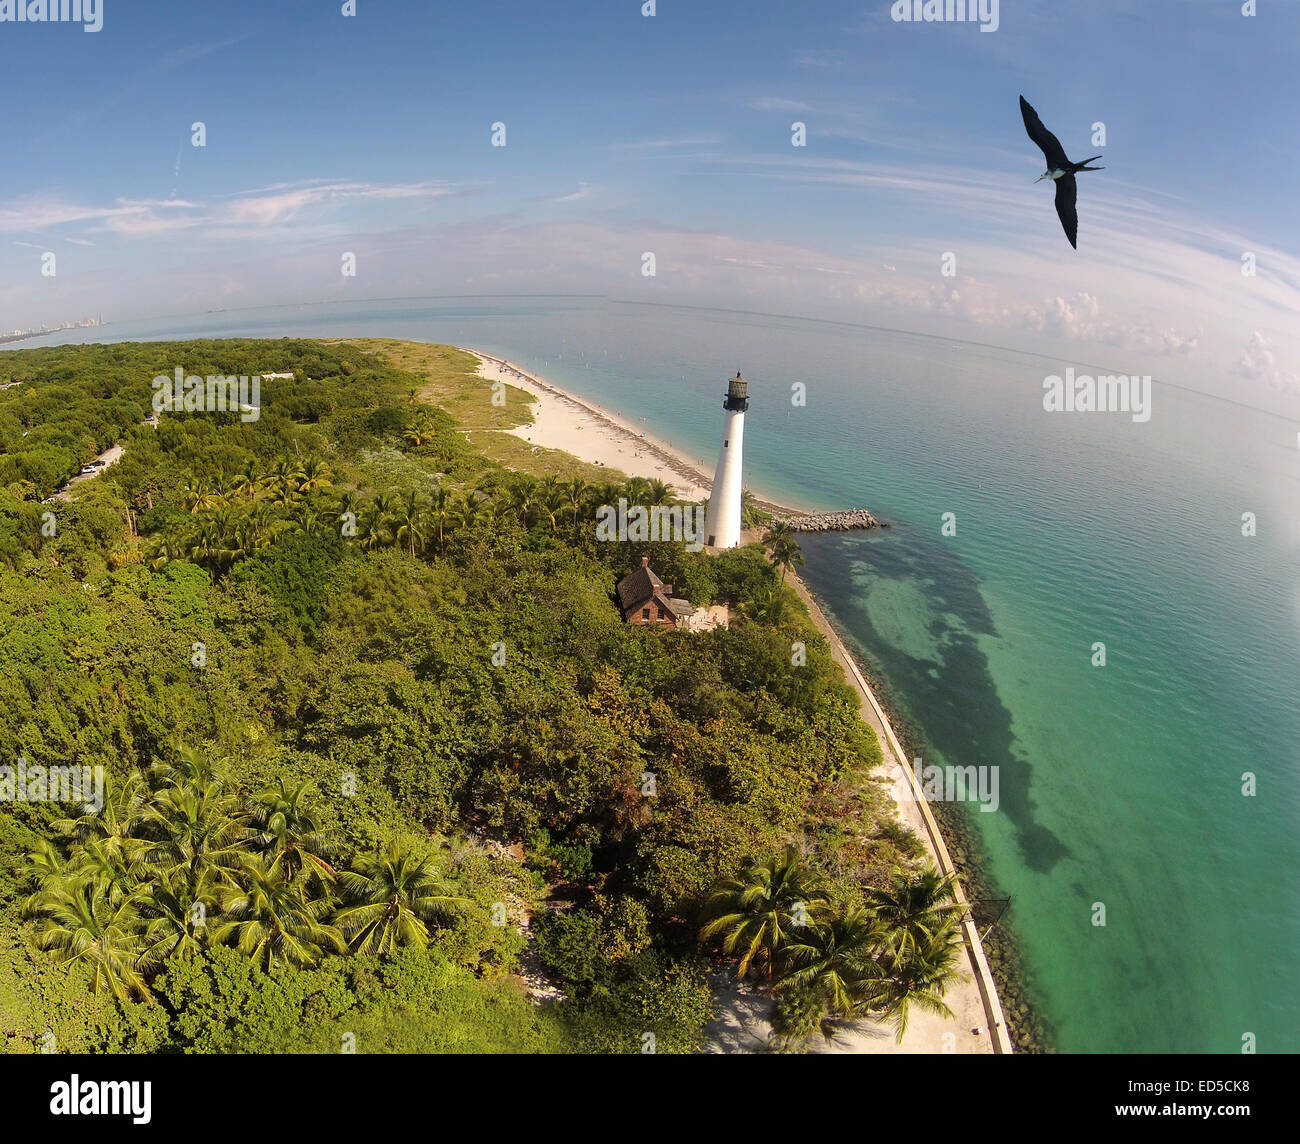 South Florida lighthouse in Key Biscayne seen from birds eye view Stock Photo